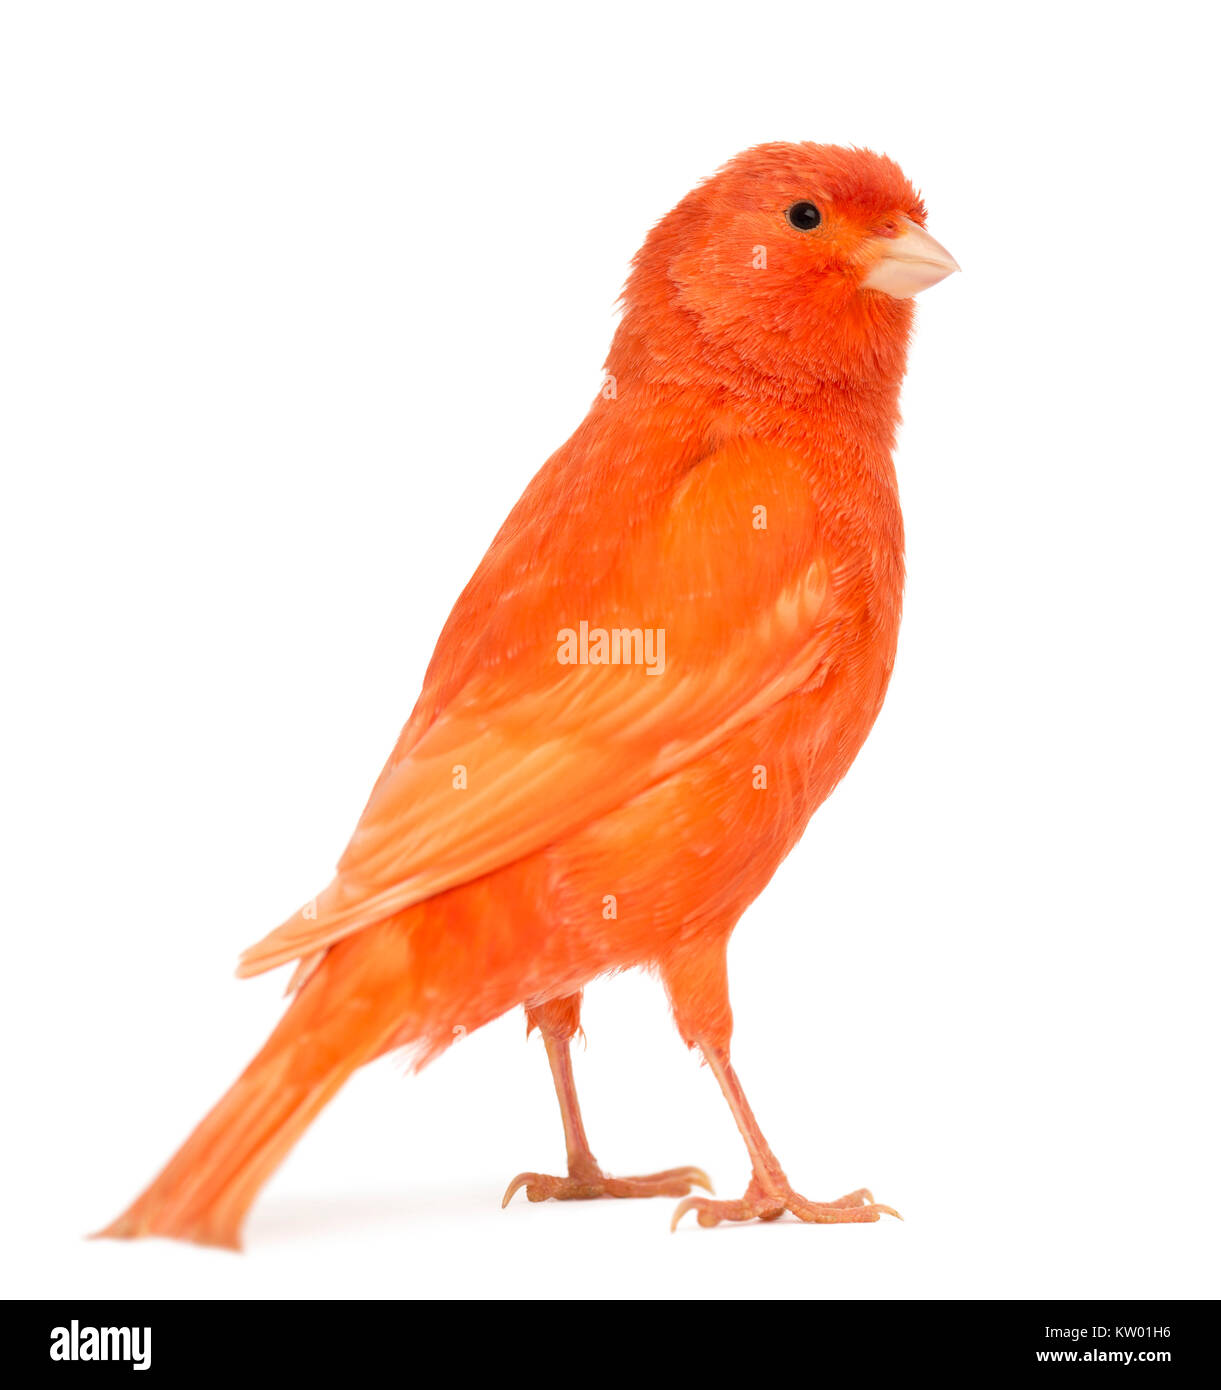 Red canary, Serinus canaria, against white background Stock Photo